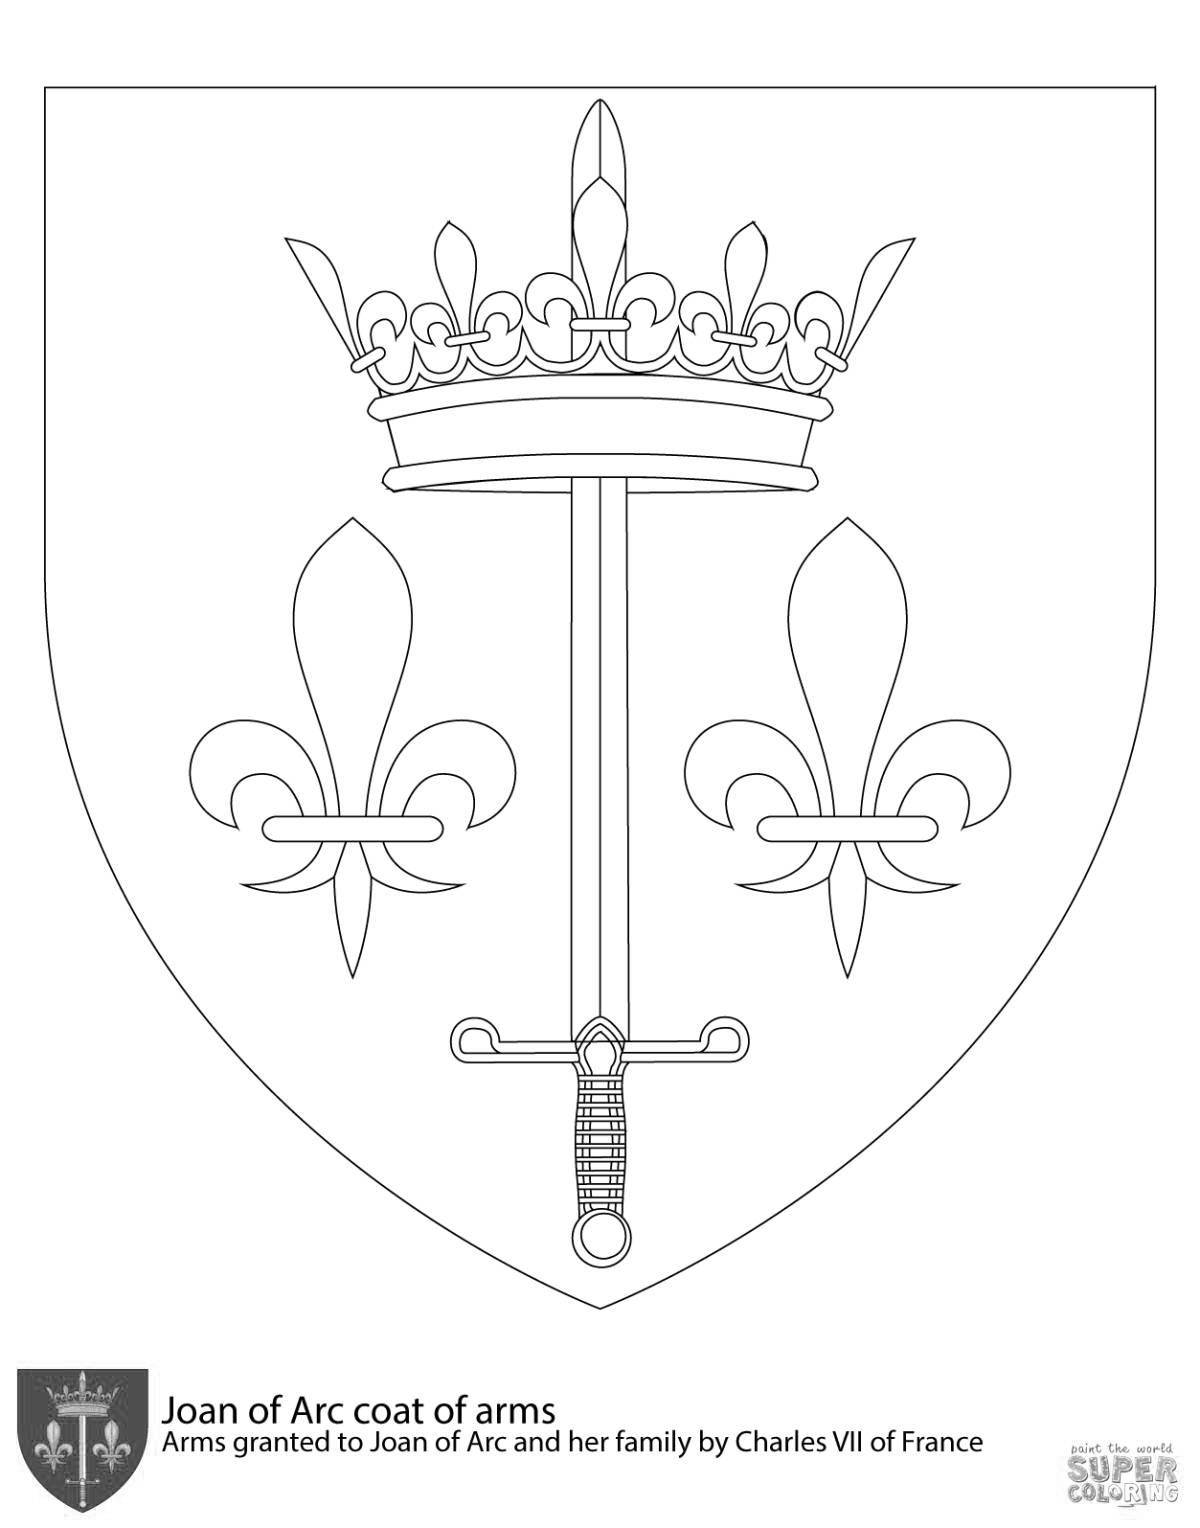 Shiny coloring of the knight's coat of arms